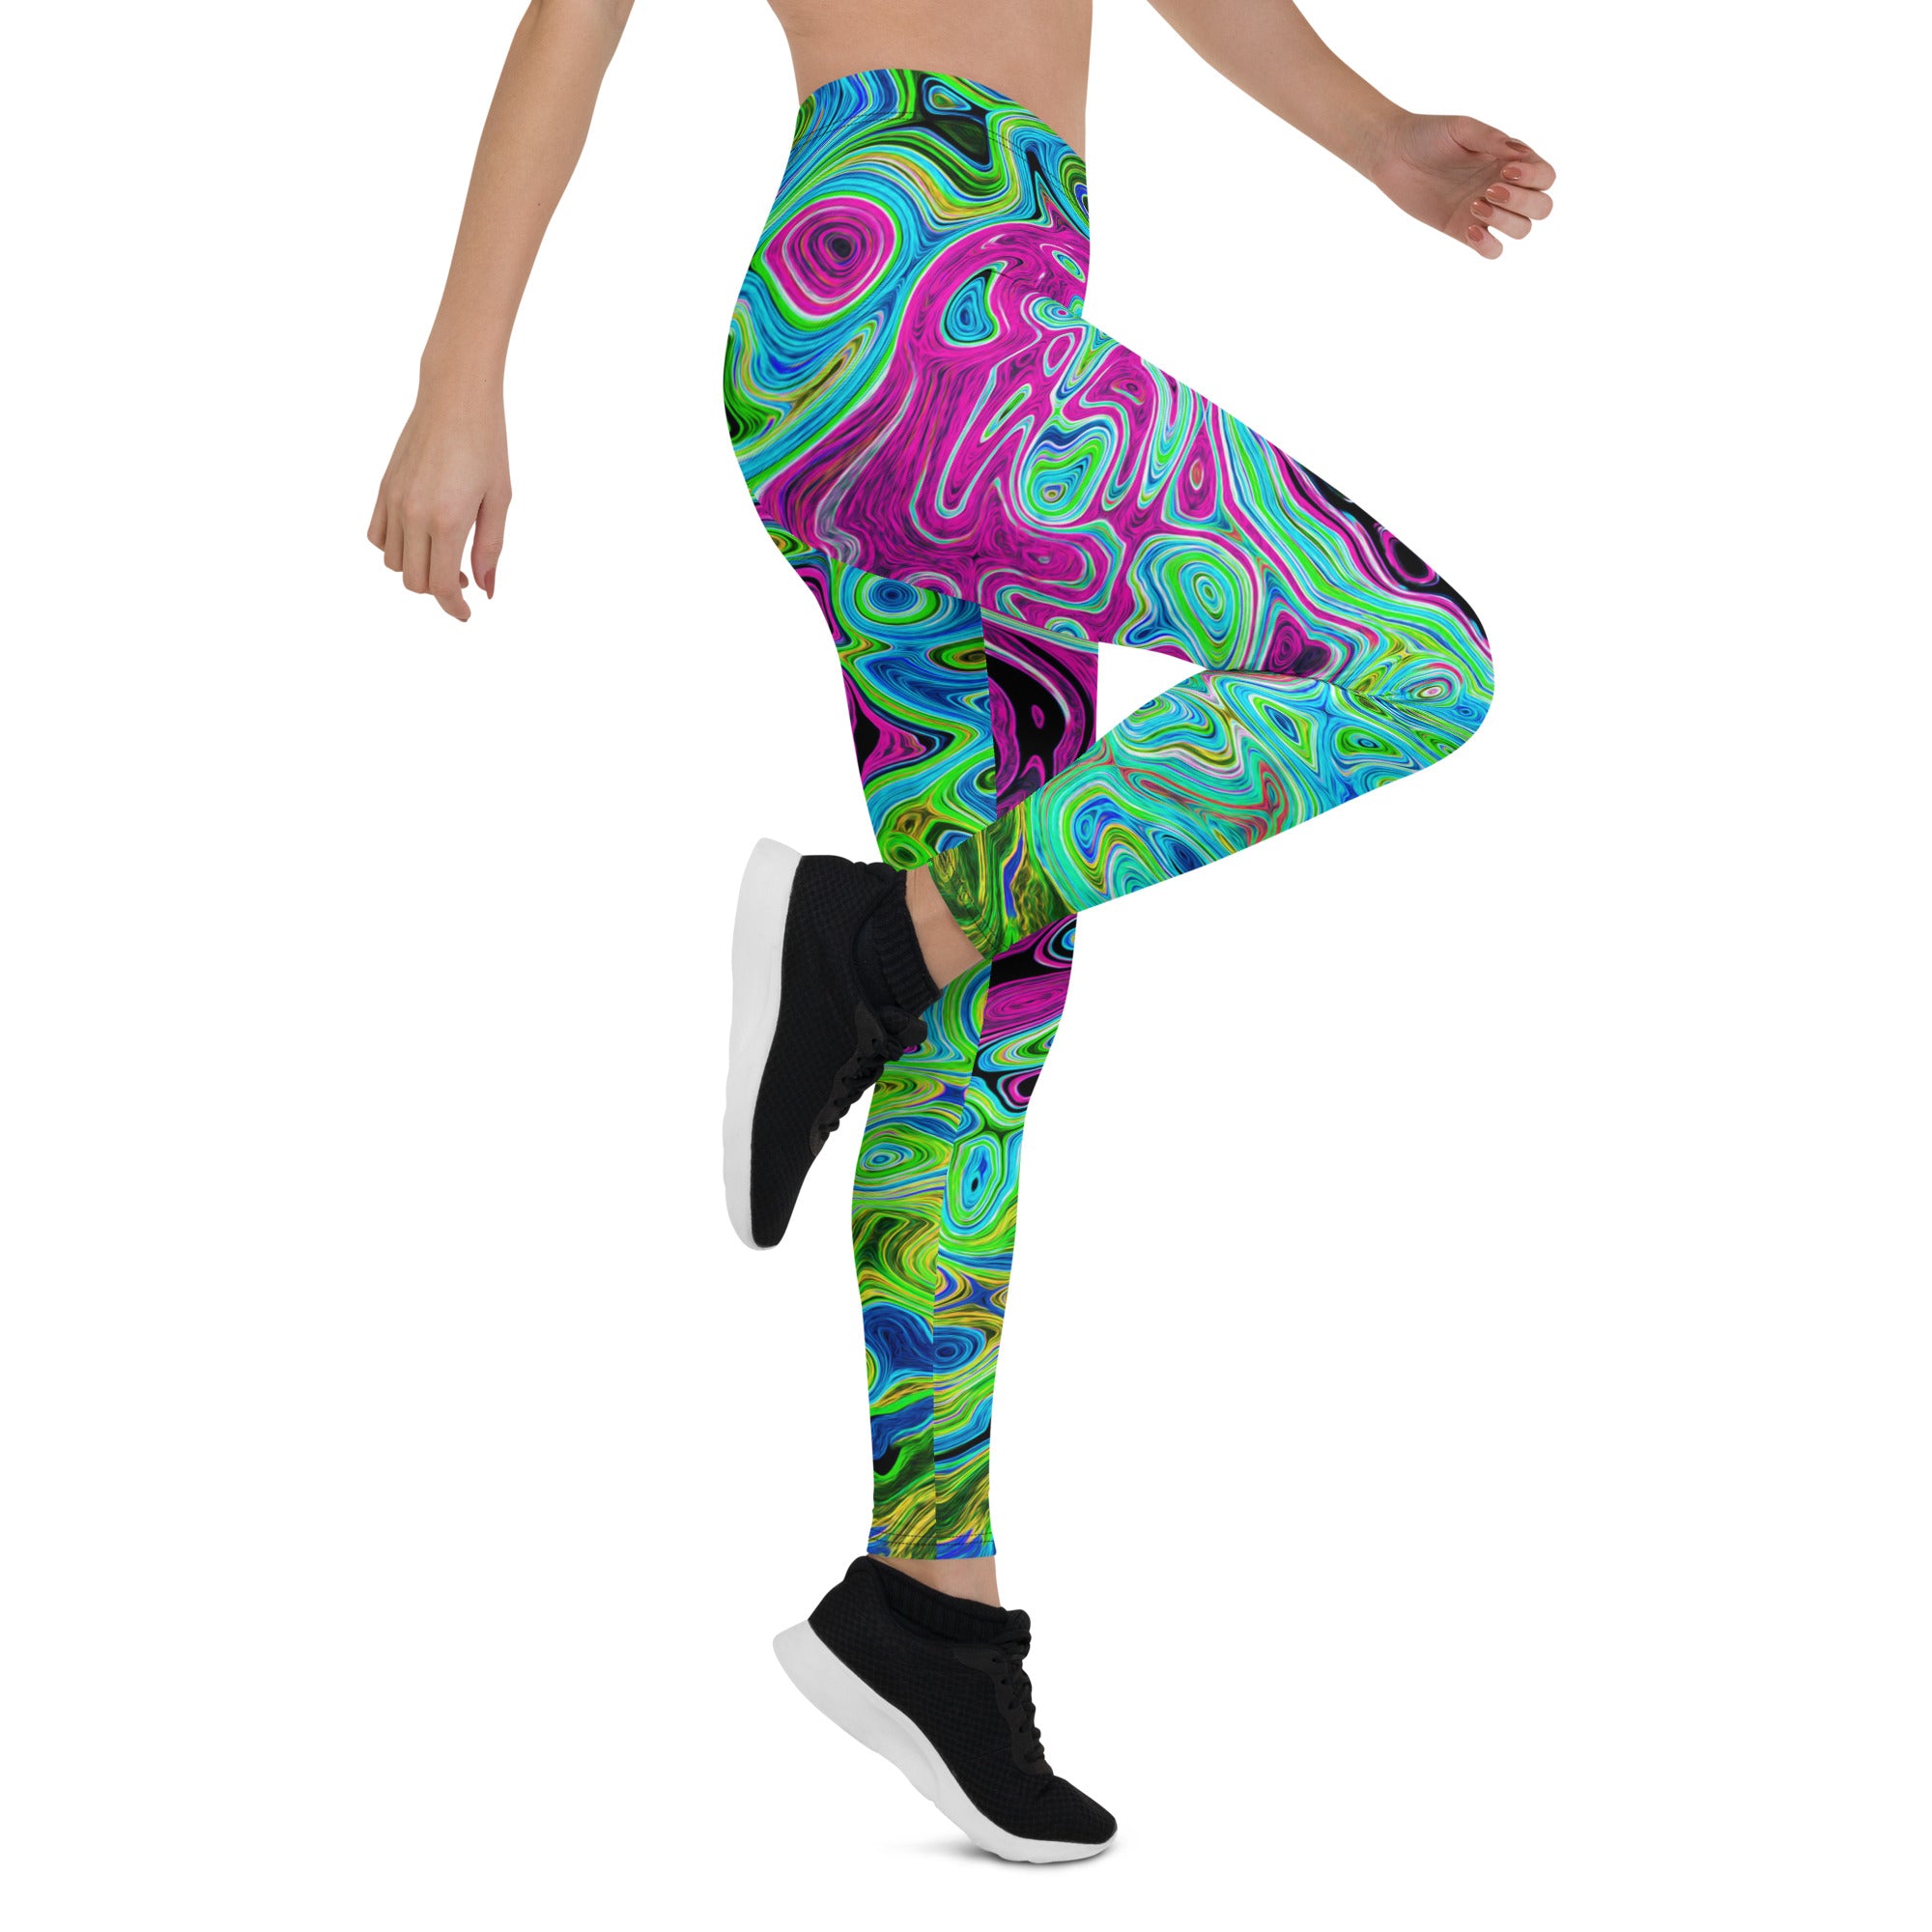 Leggings for Women - Hot Pink and Blue Groovy Abstract Retro Liquid Swirl